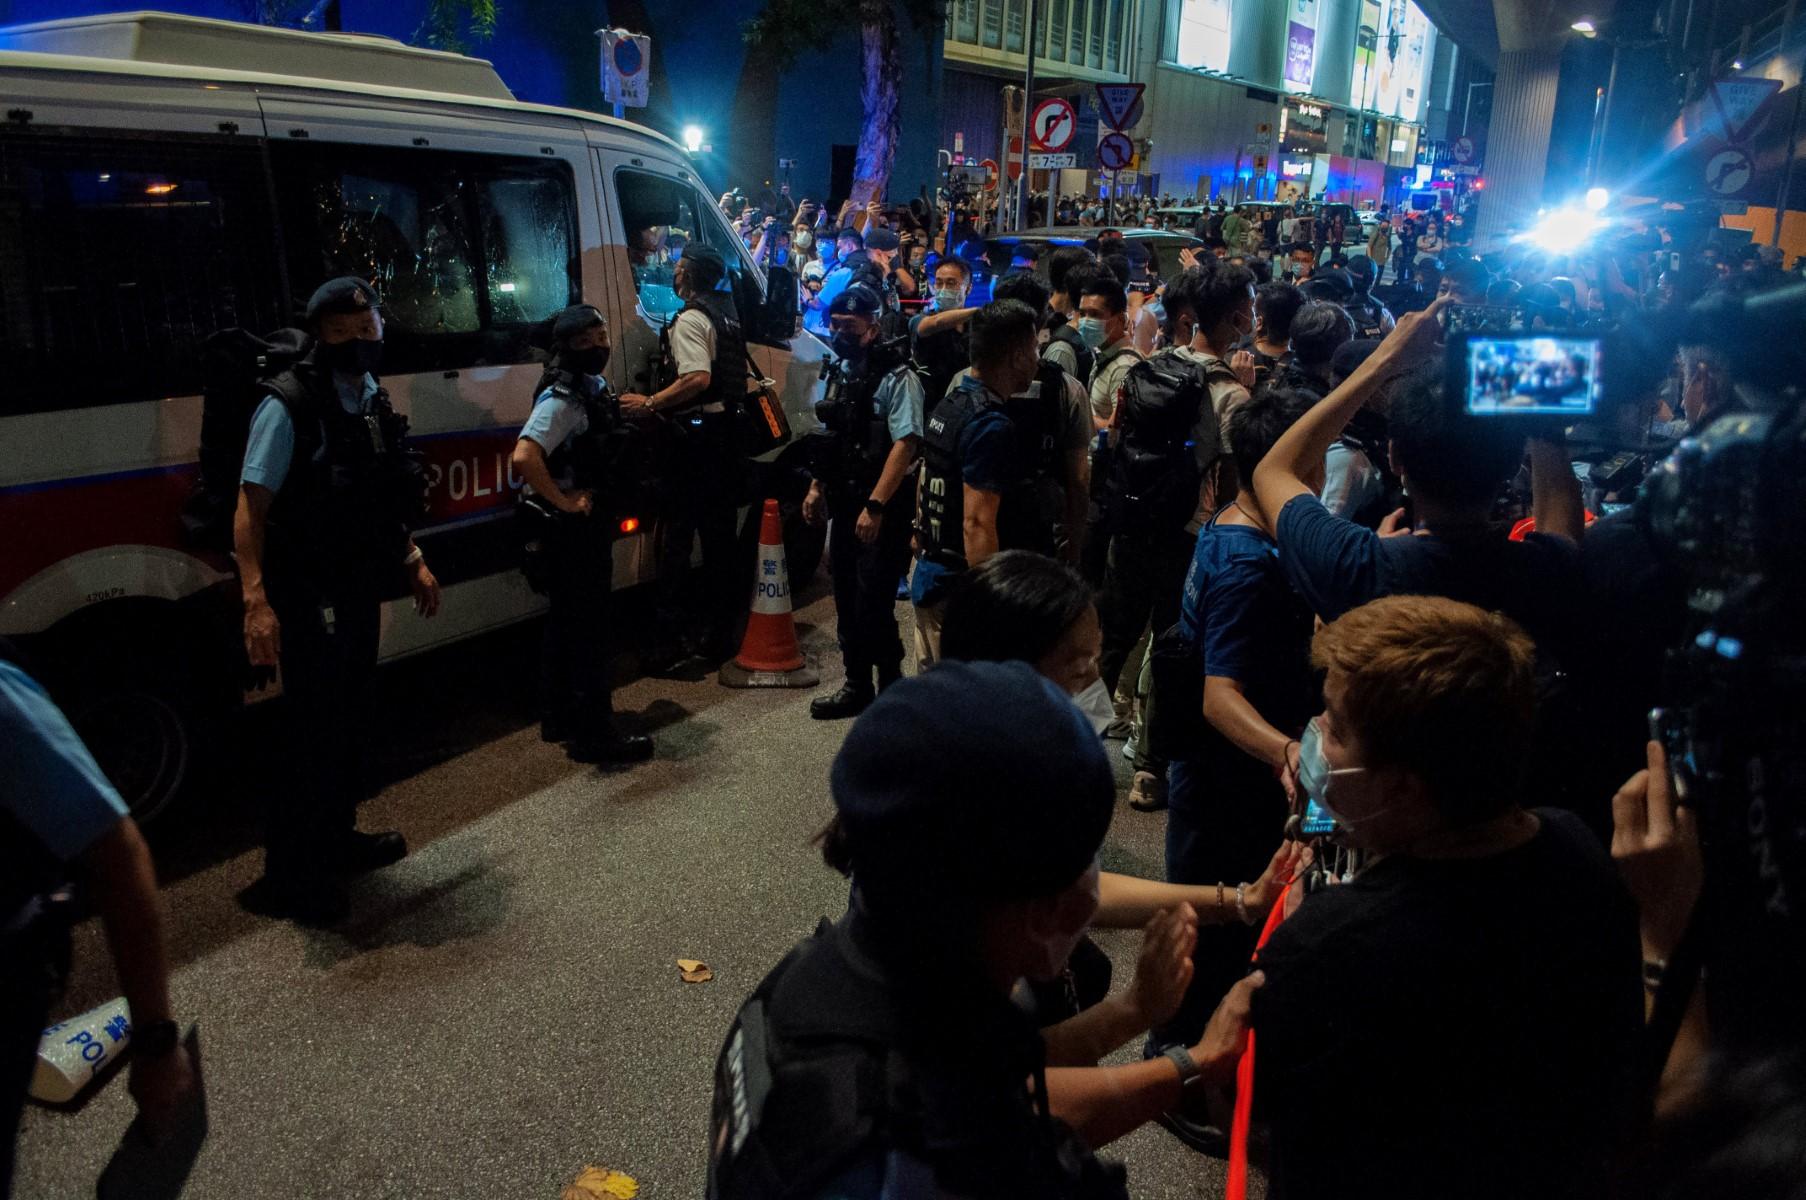 Police try to control the crowd in the Causeway Bay district of Hong Kong on June 4, near the venue where Hong Kong people have traditionally gathered to mourn victims of China's 1989 Tiananmen Square crackdown, on the 33rd anniversary of the event. Photo: AFP